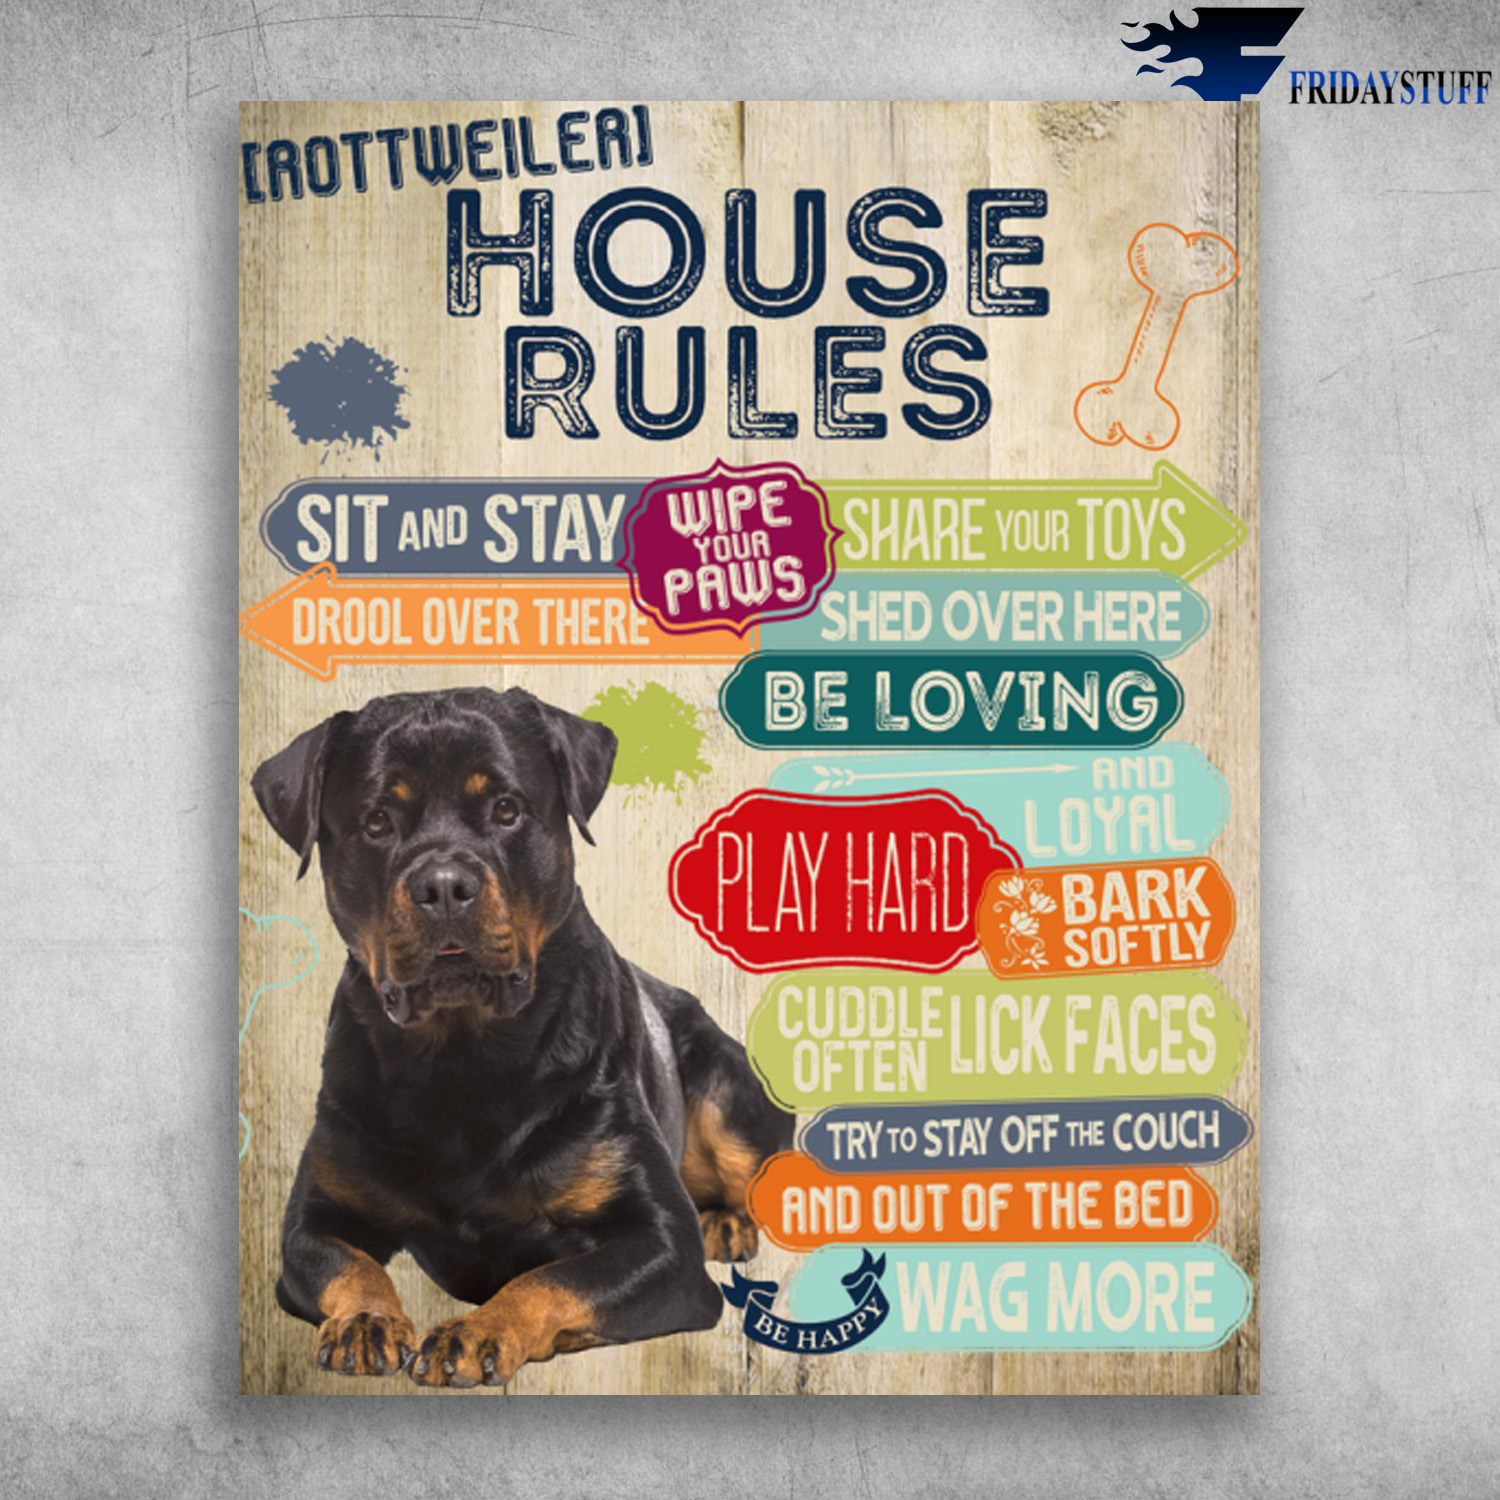 Rottweiler House Rules Sit And Stay Share Your Toys